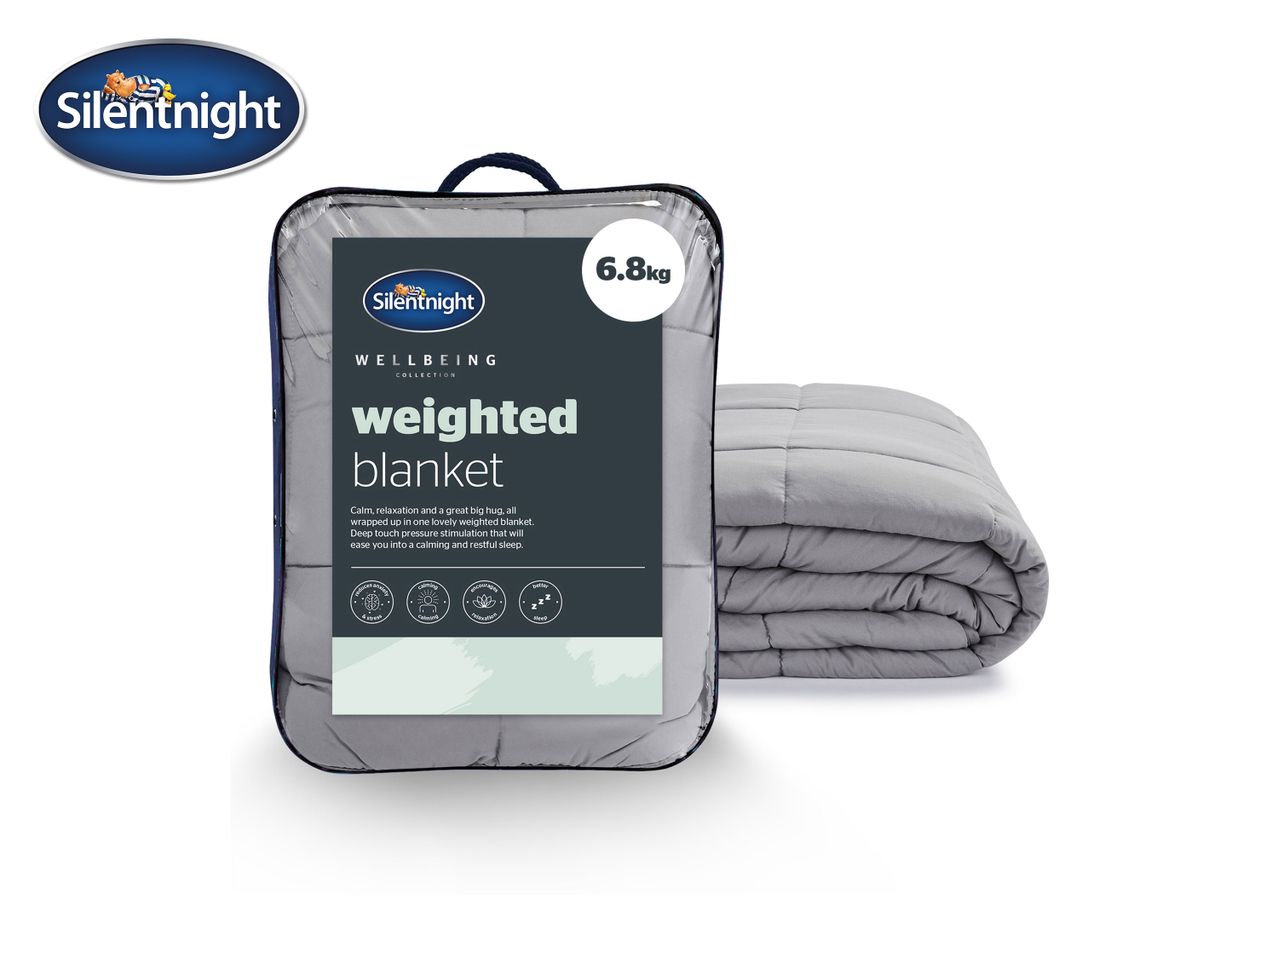 Go to full screen view: Silentnight 6.8kg Weighted Blanket - Image 1